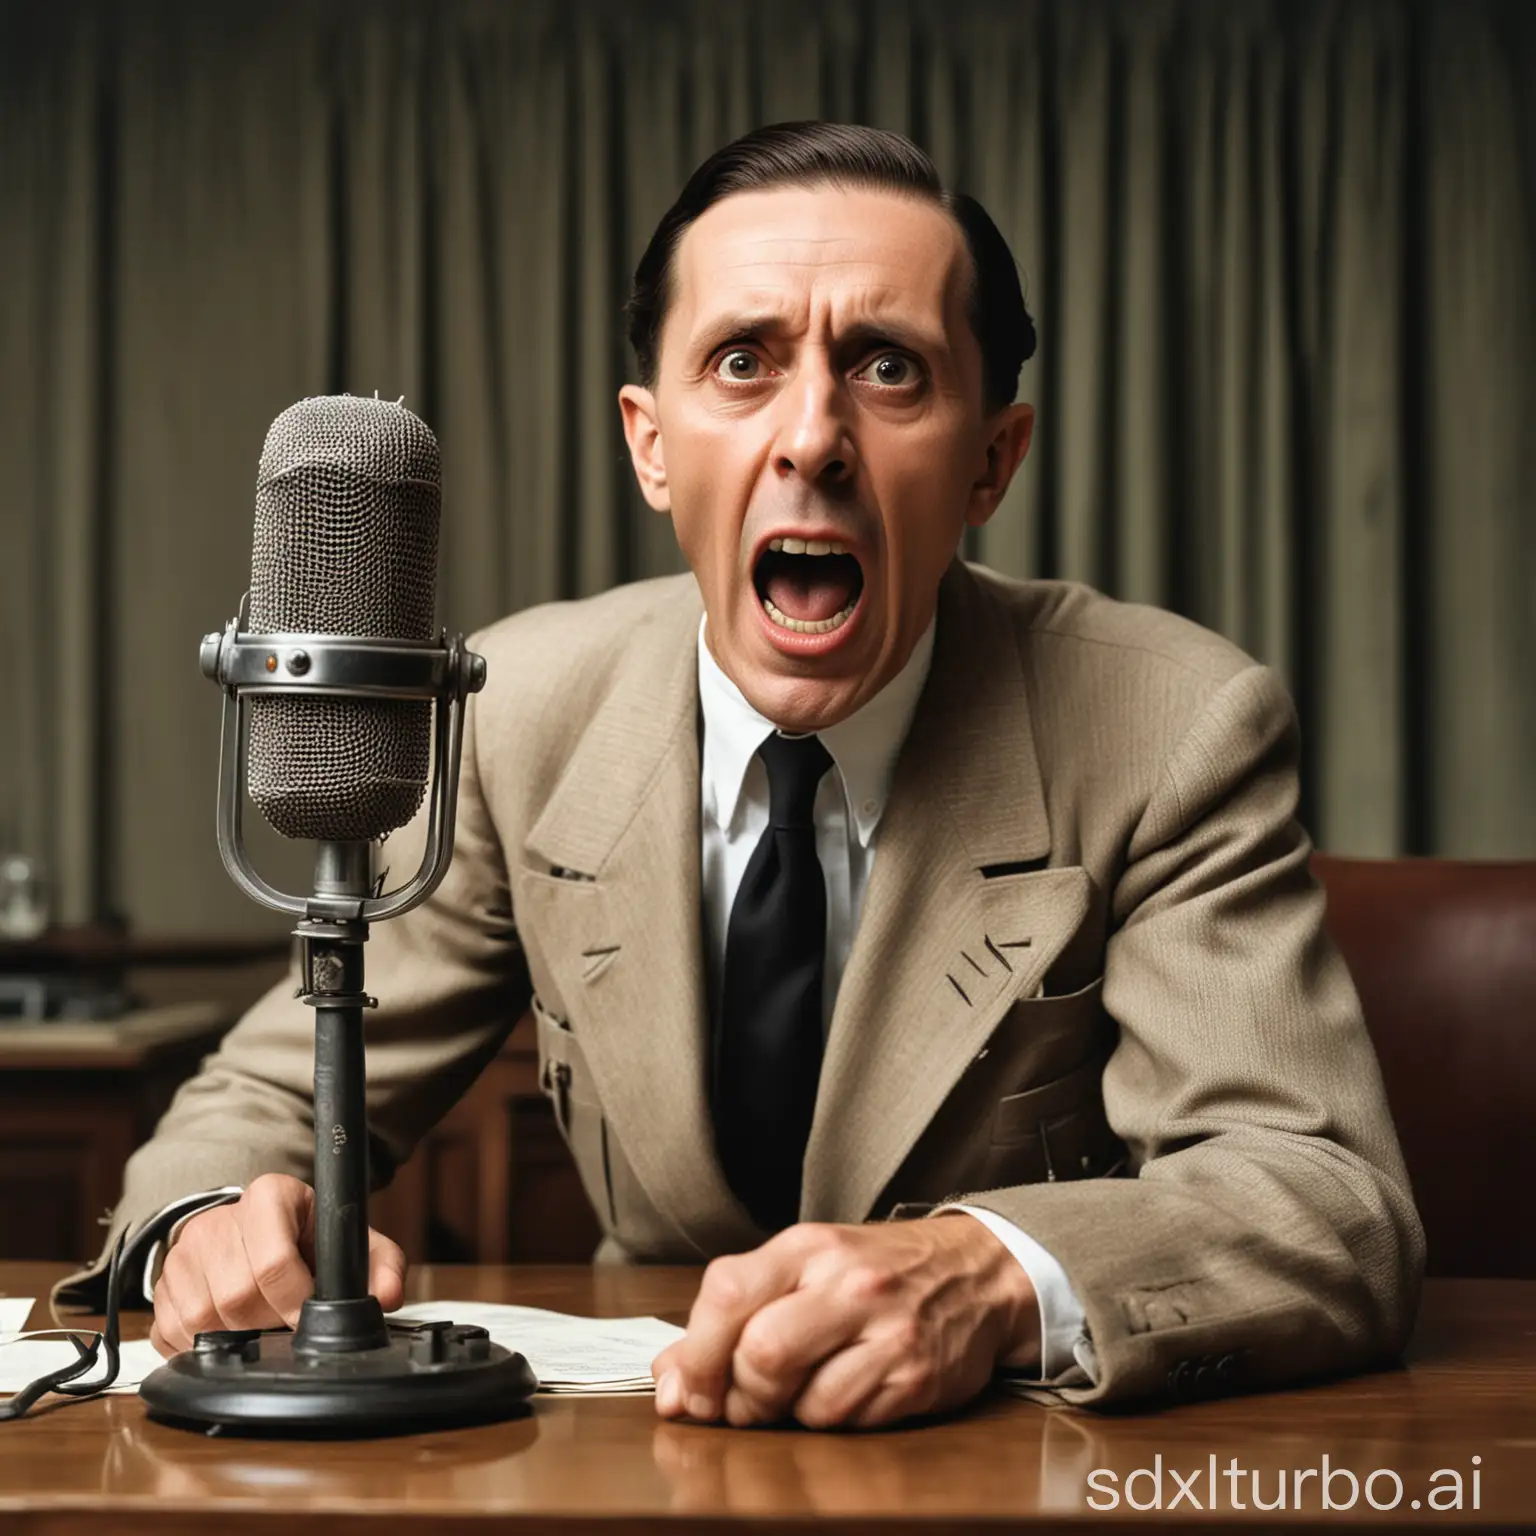 old color photo of angry joseph goebbels screaming in an old German radio microphone on a table